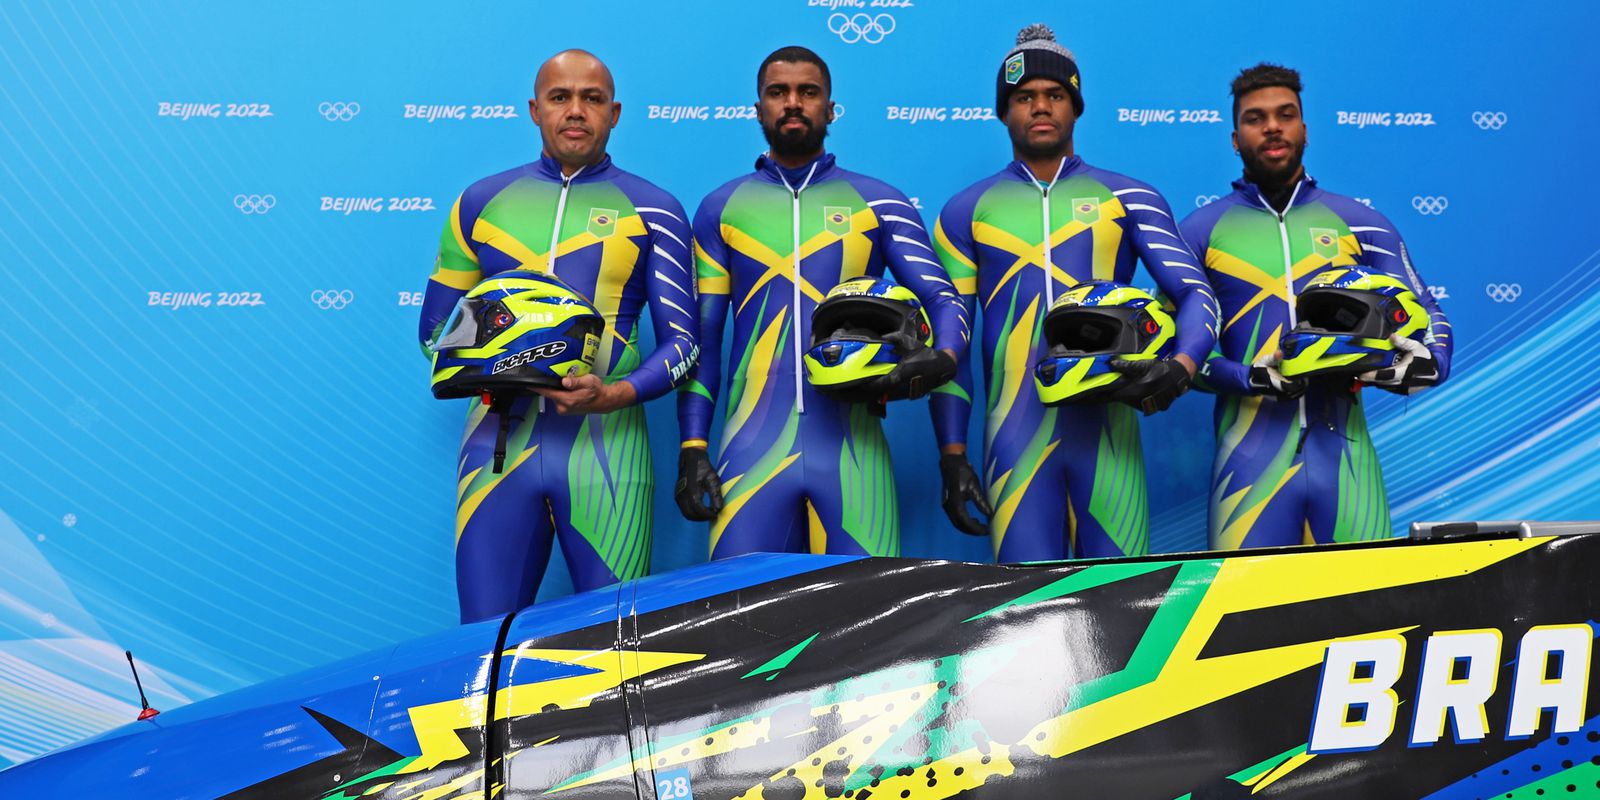 Edson Bindilatti retires from bobsled with historic final in Beijing